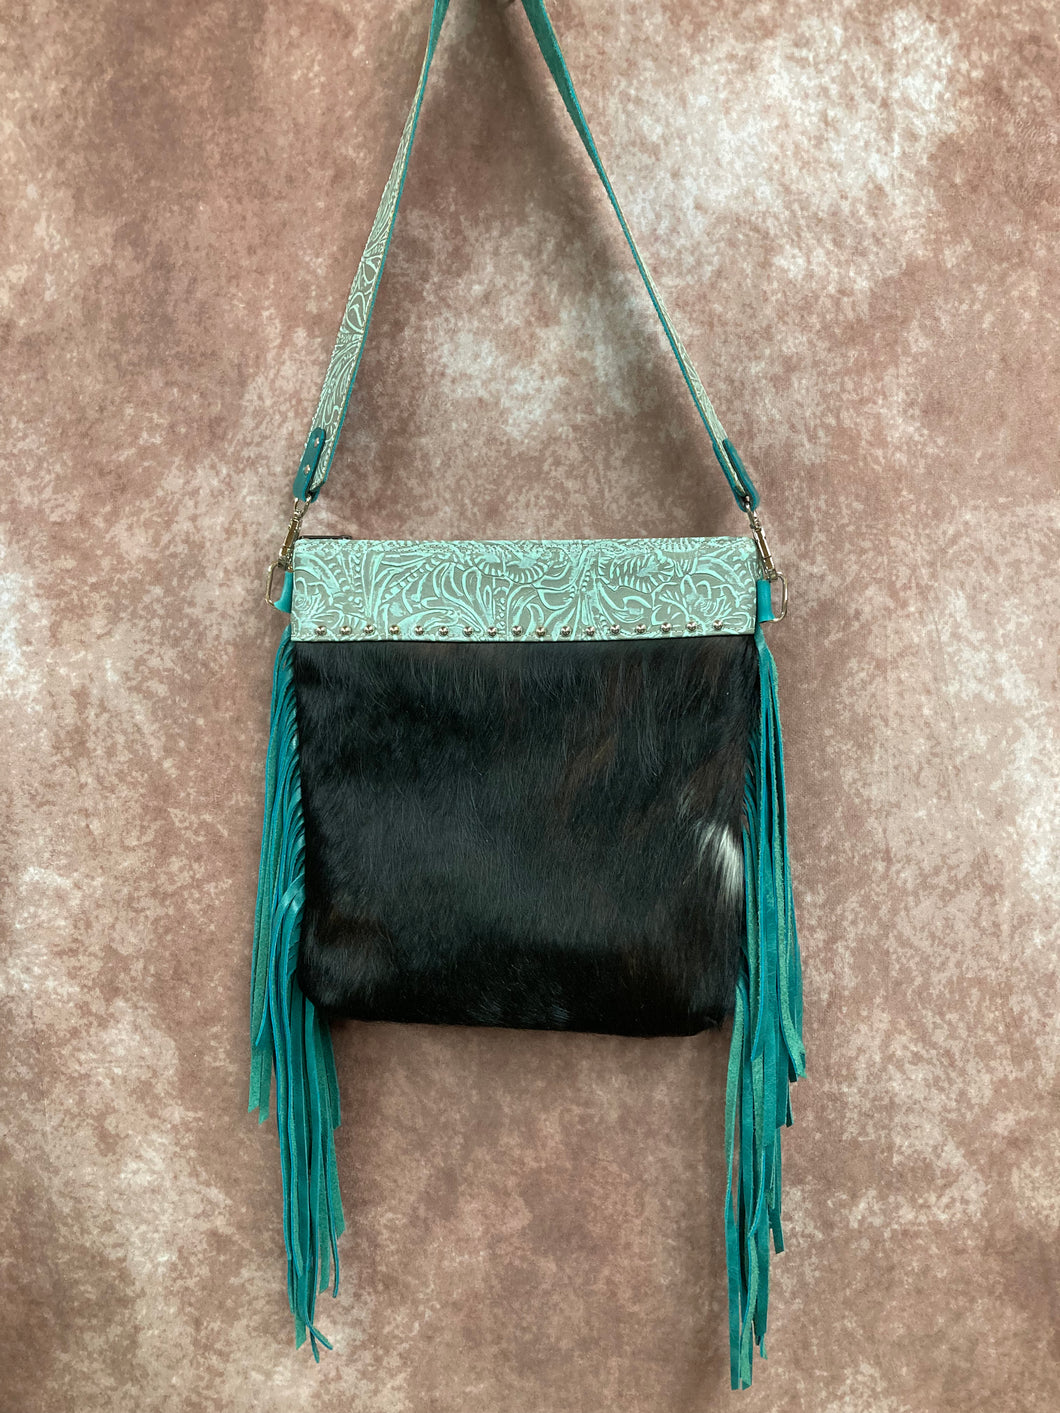 Conceal Carry - Black Hair-on-Hide with Turquoise Floral Embossed Leather